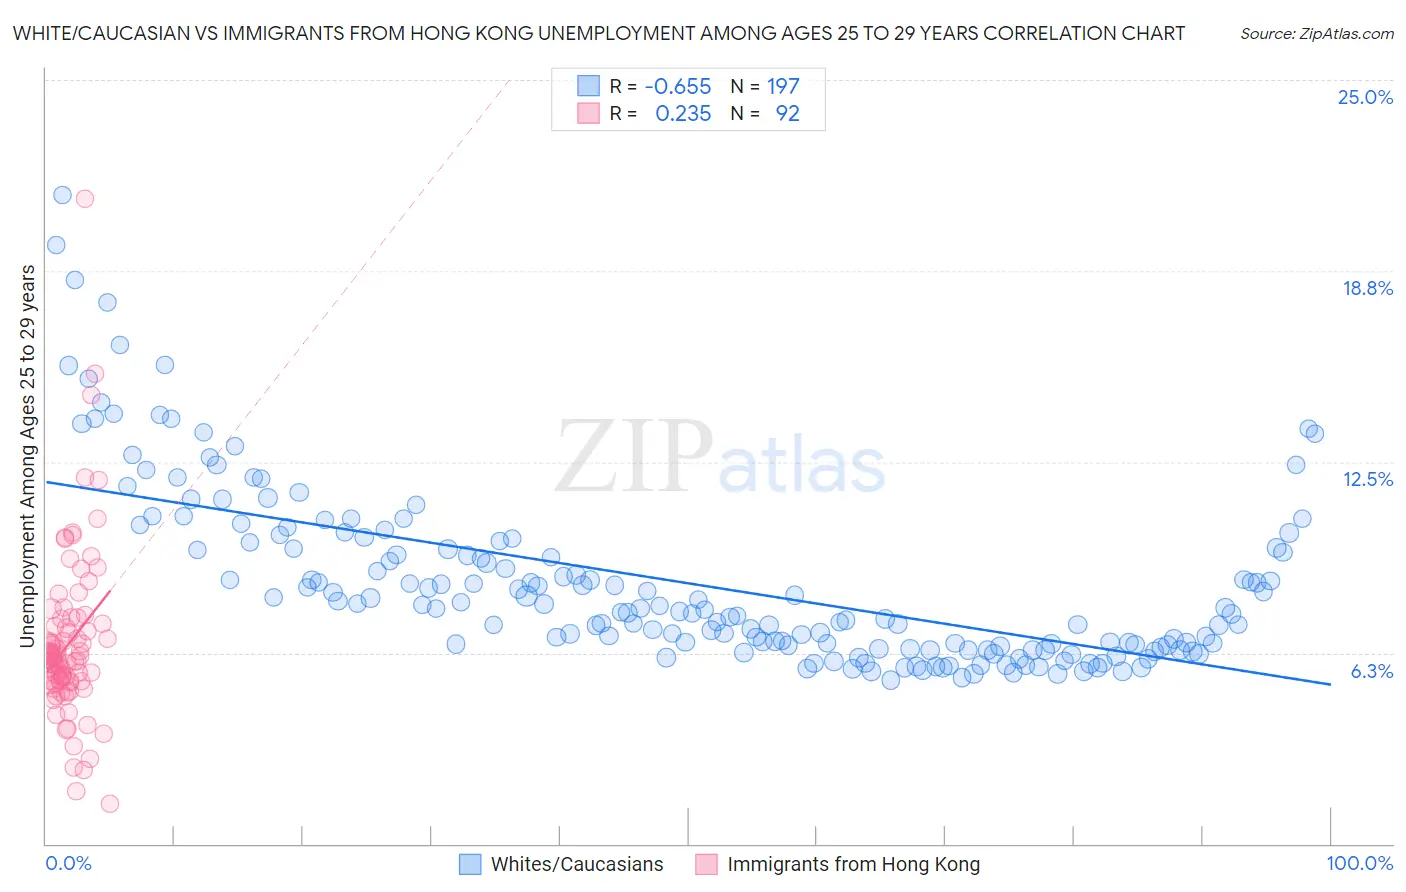 White/Caucasian vs Immigrants from Hong Kong Unemployment Among Ages 25 to 29 years